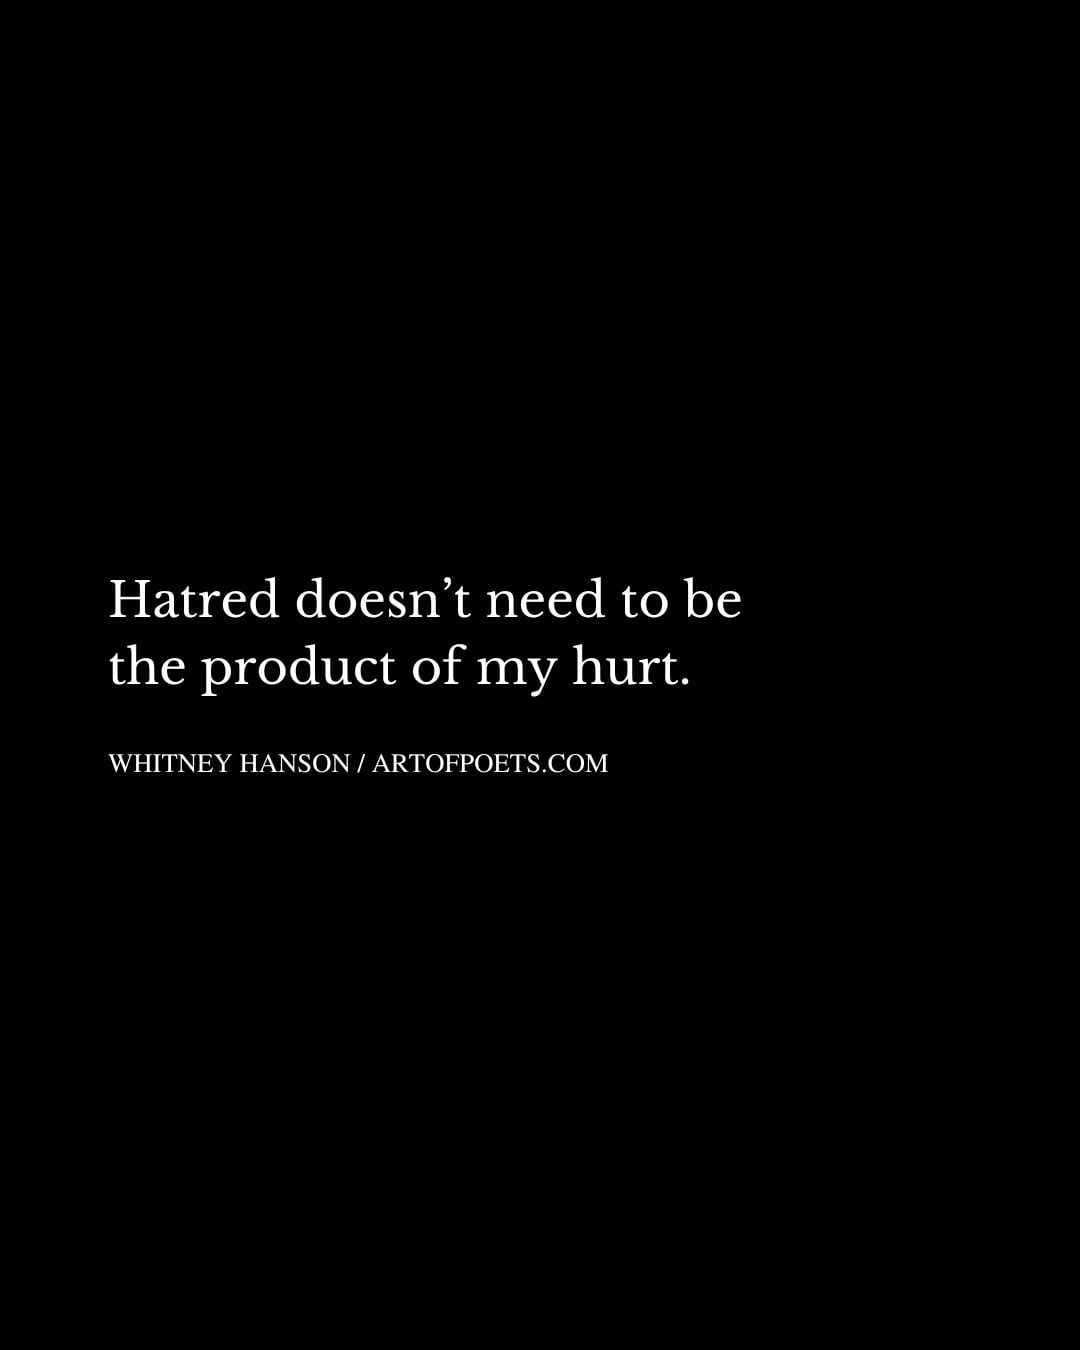 Hatred doesnt need to be the product of my hurt 1